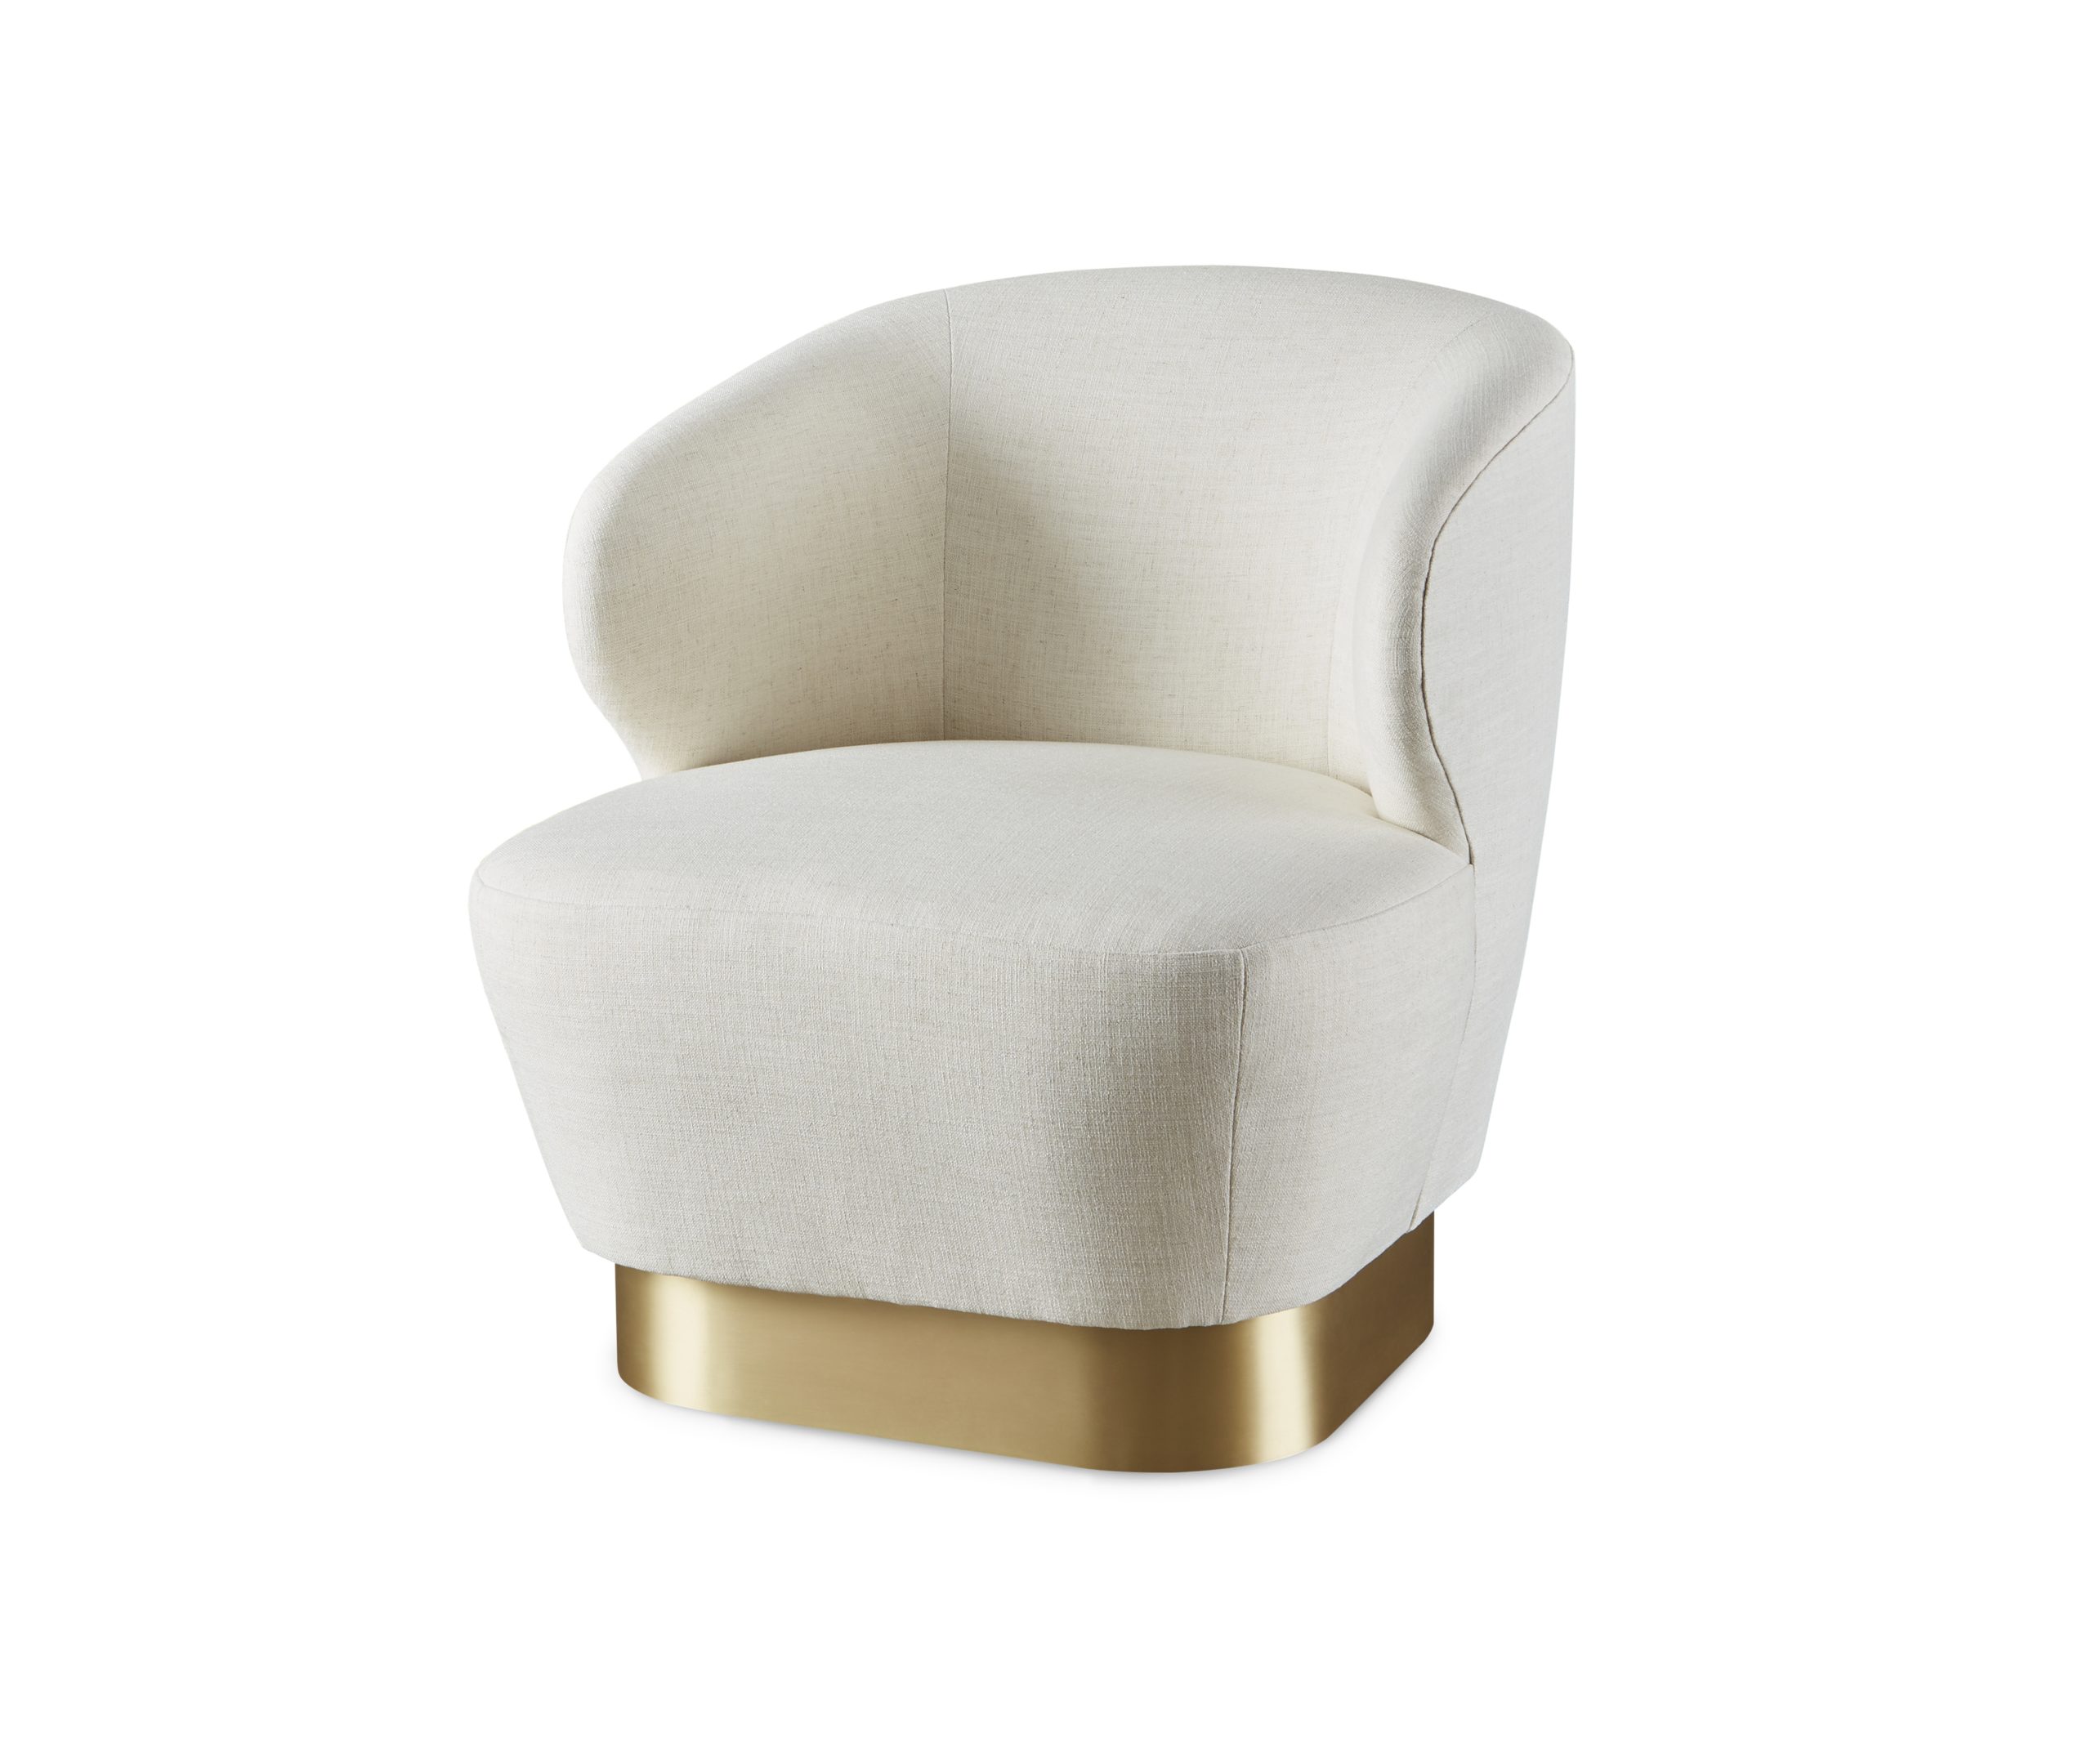 Baker_products_WNWN_lambert_swivel_chair_BAU3103c_FRONT_3QRT-scaled-2